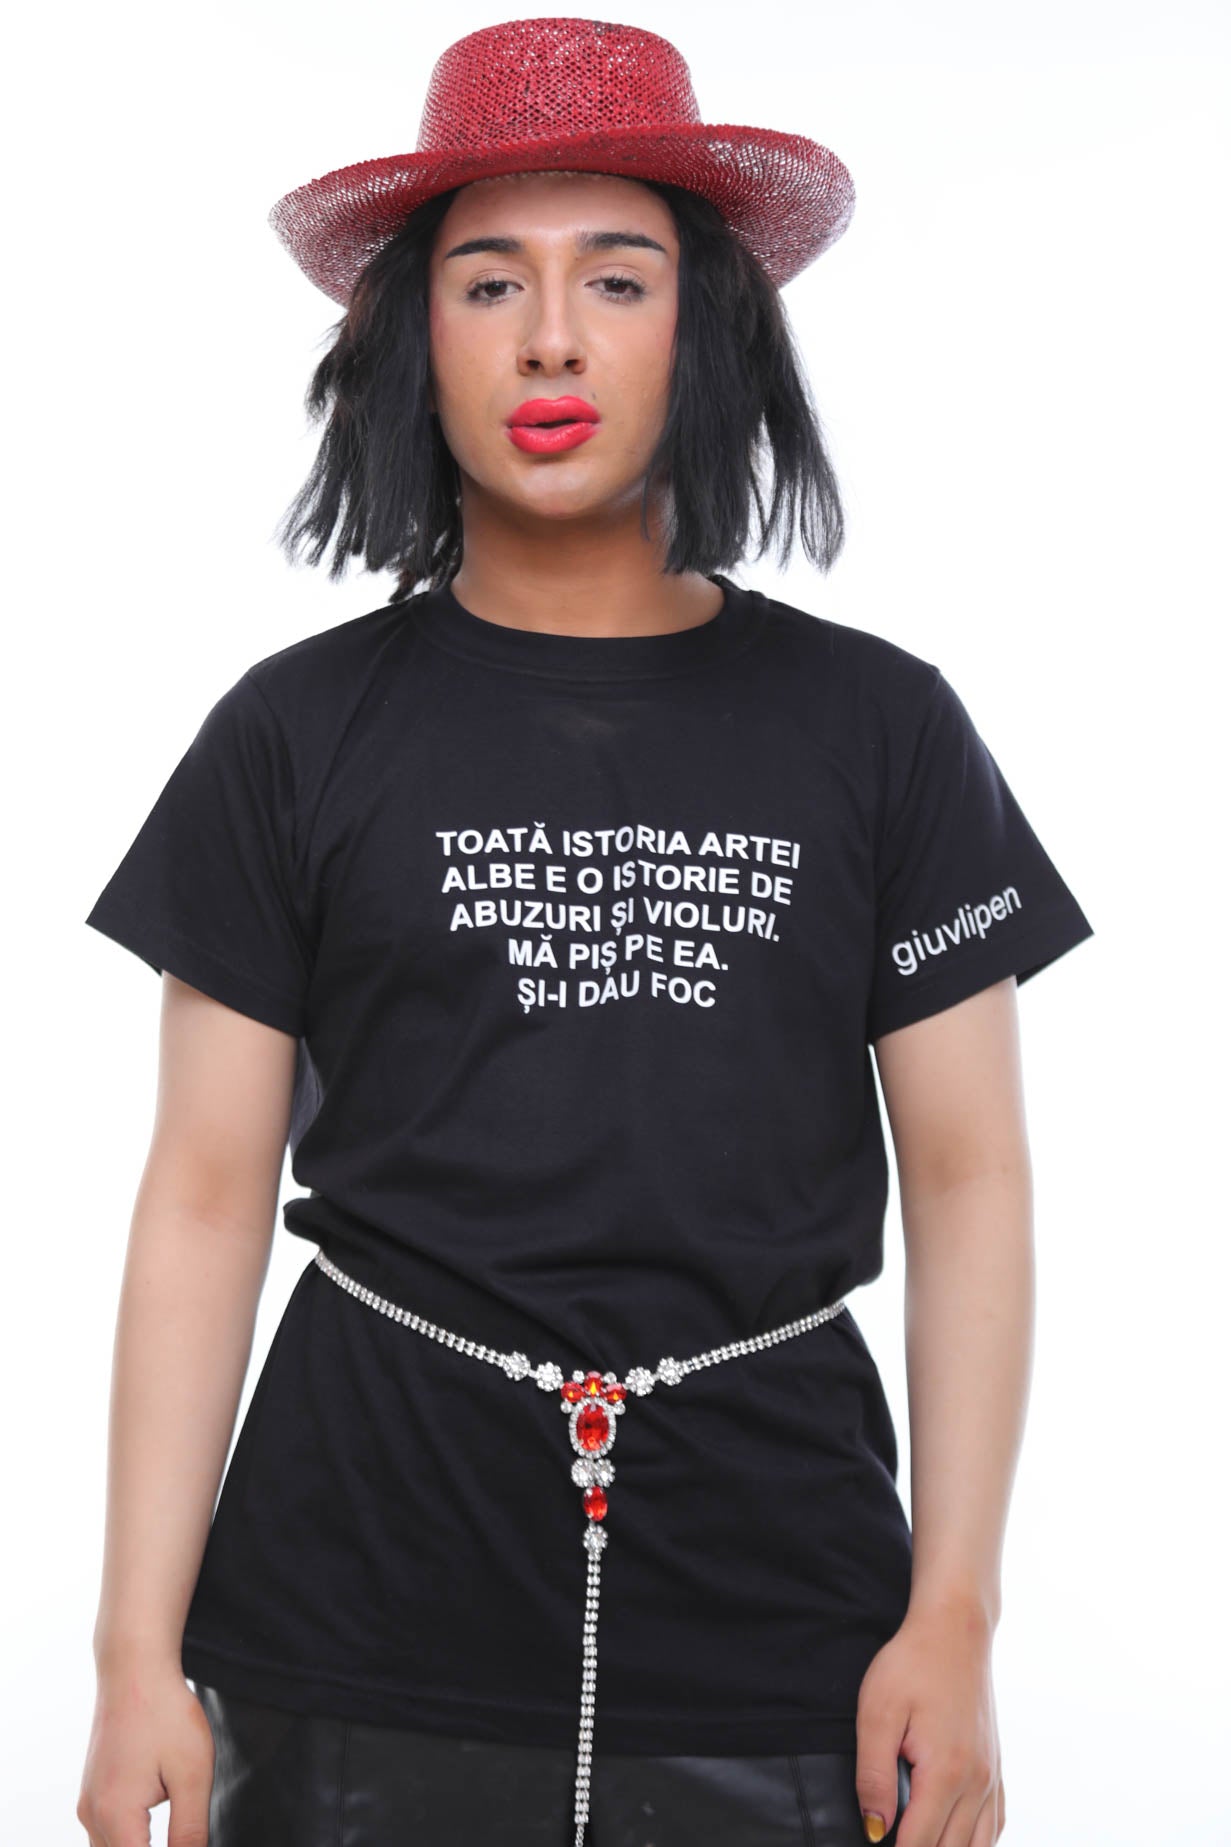 T-shirt with printed message